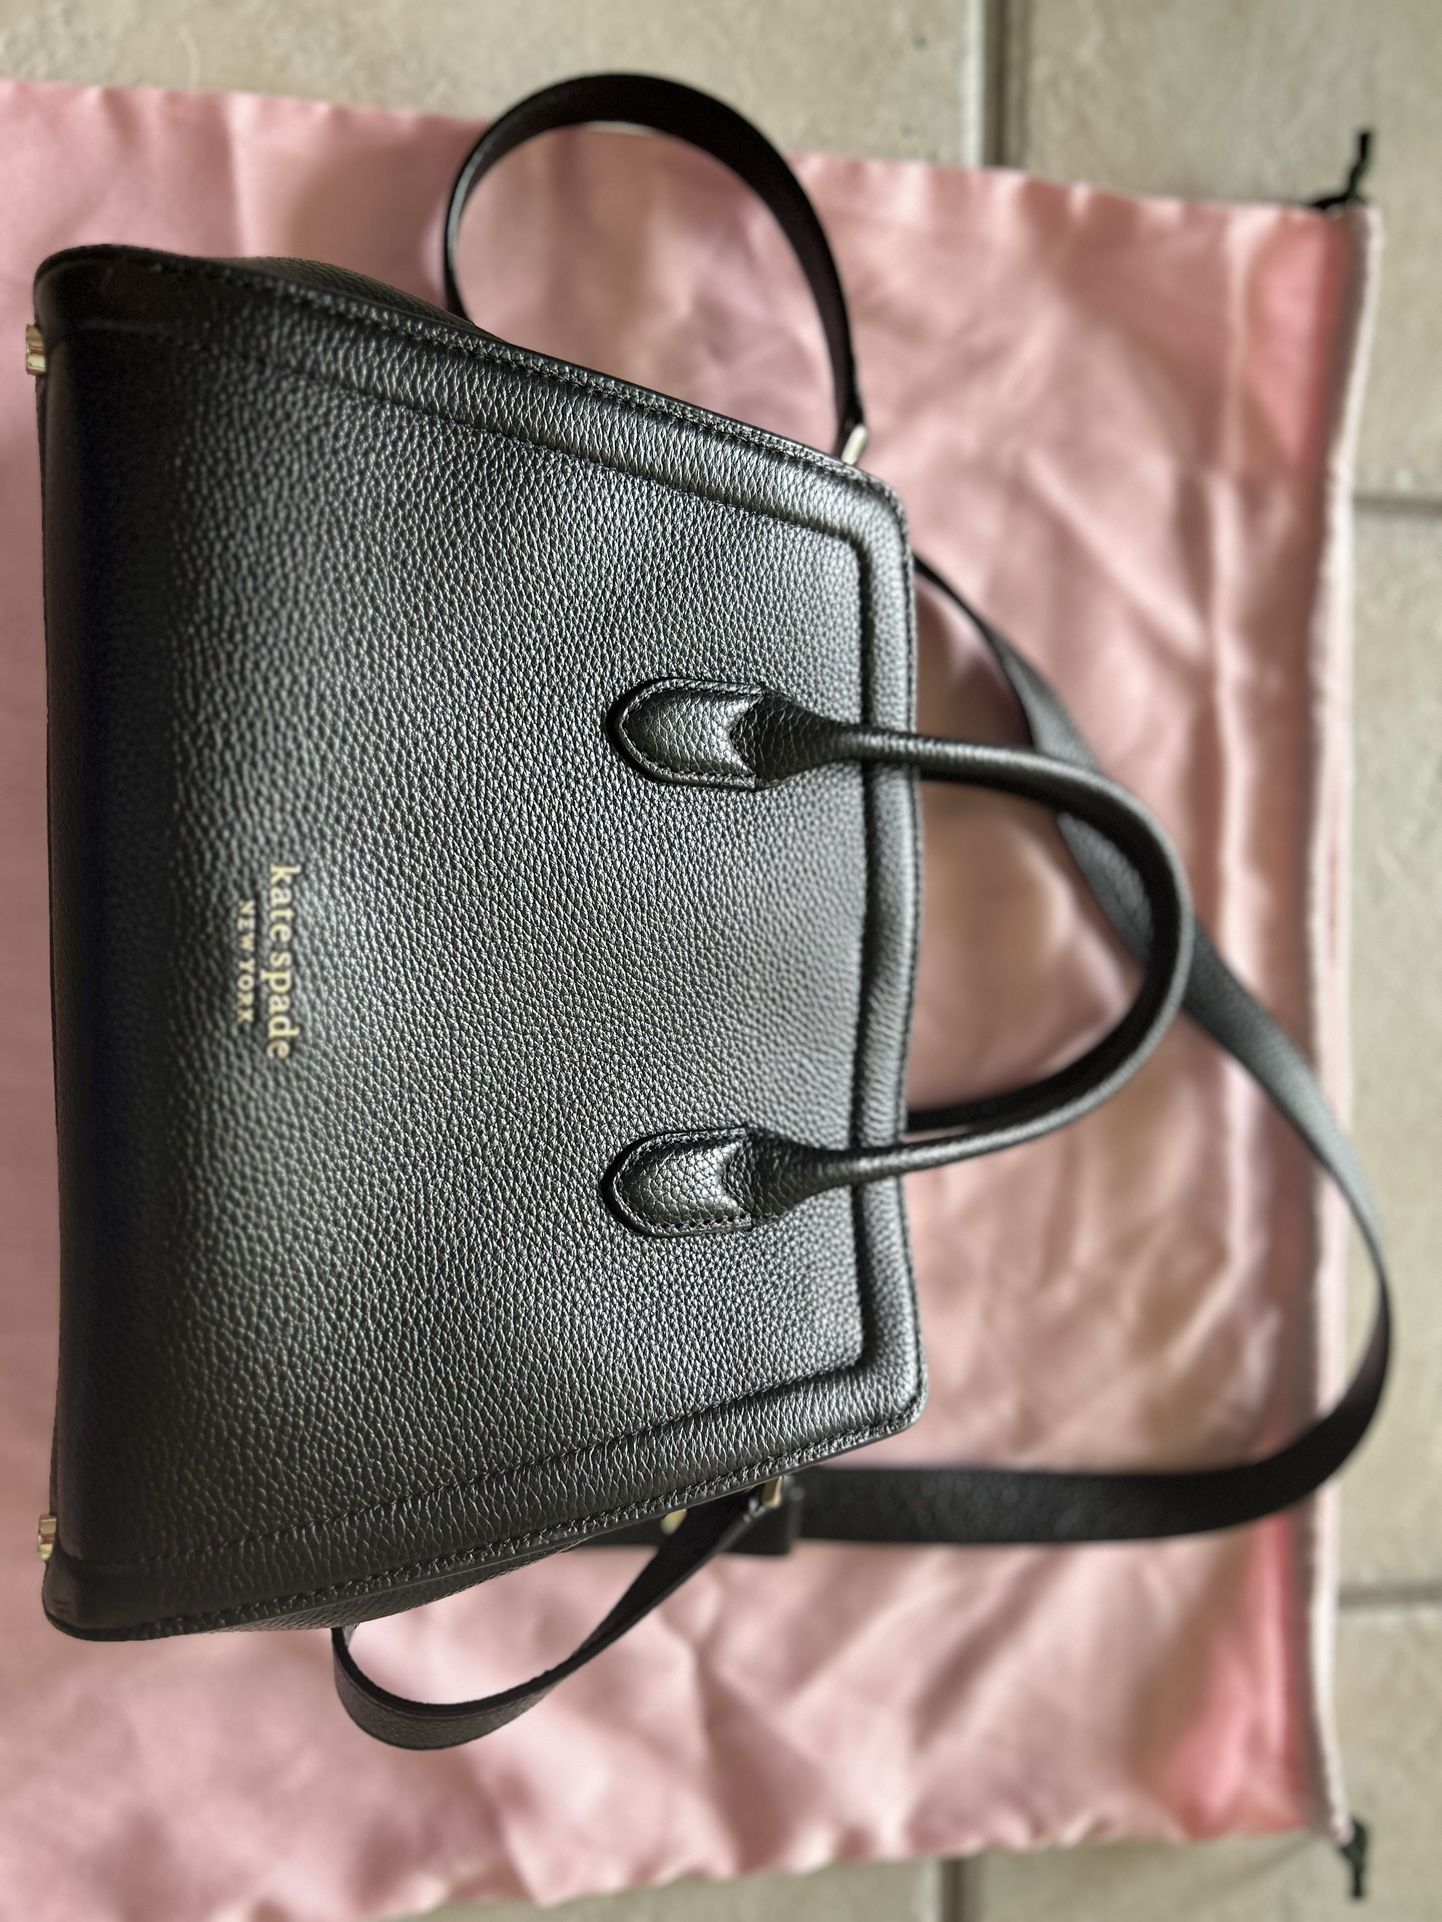 Kate Spade Med Satchel with matching Wallet